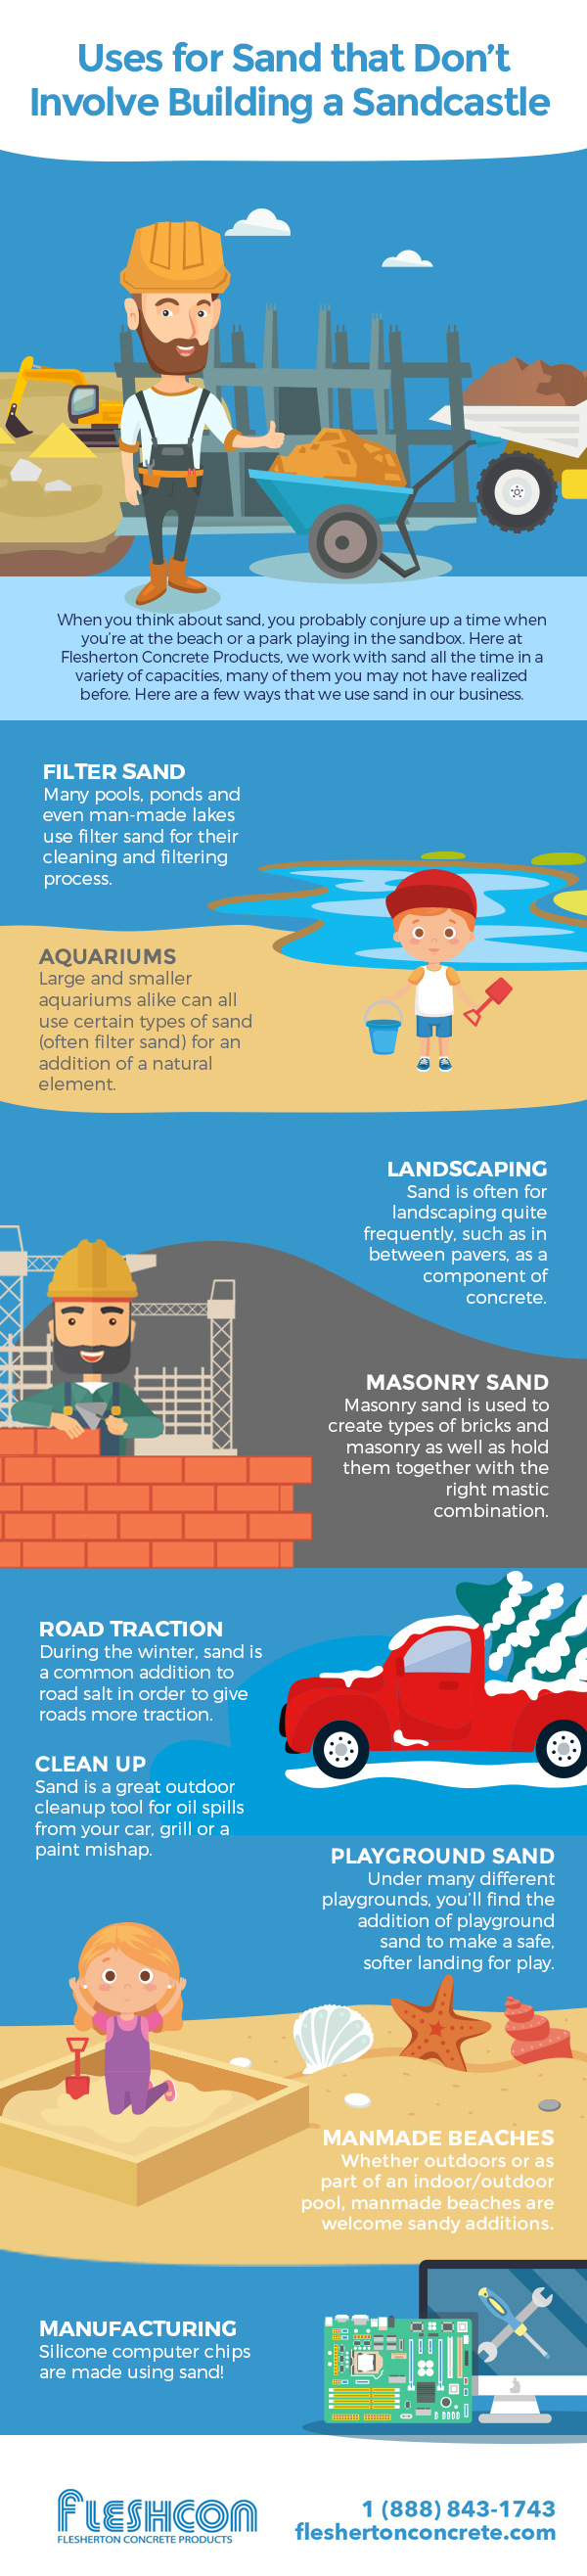 Uses for Sand that Don’t Involve Building a Sandcastle [infographic]